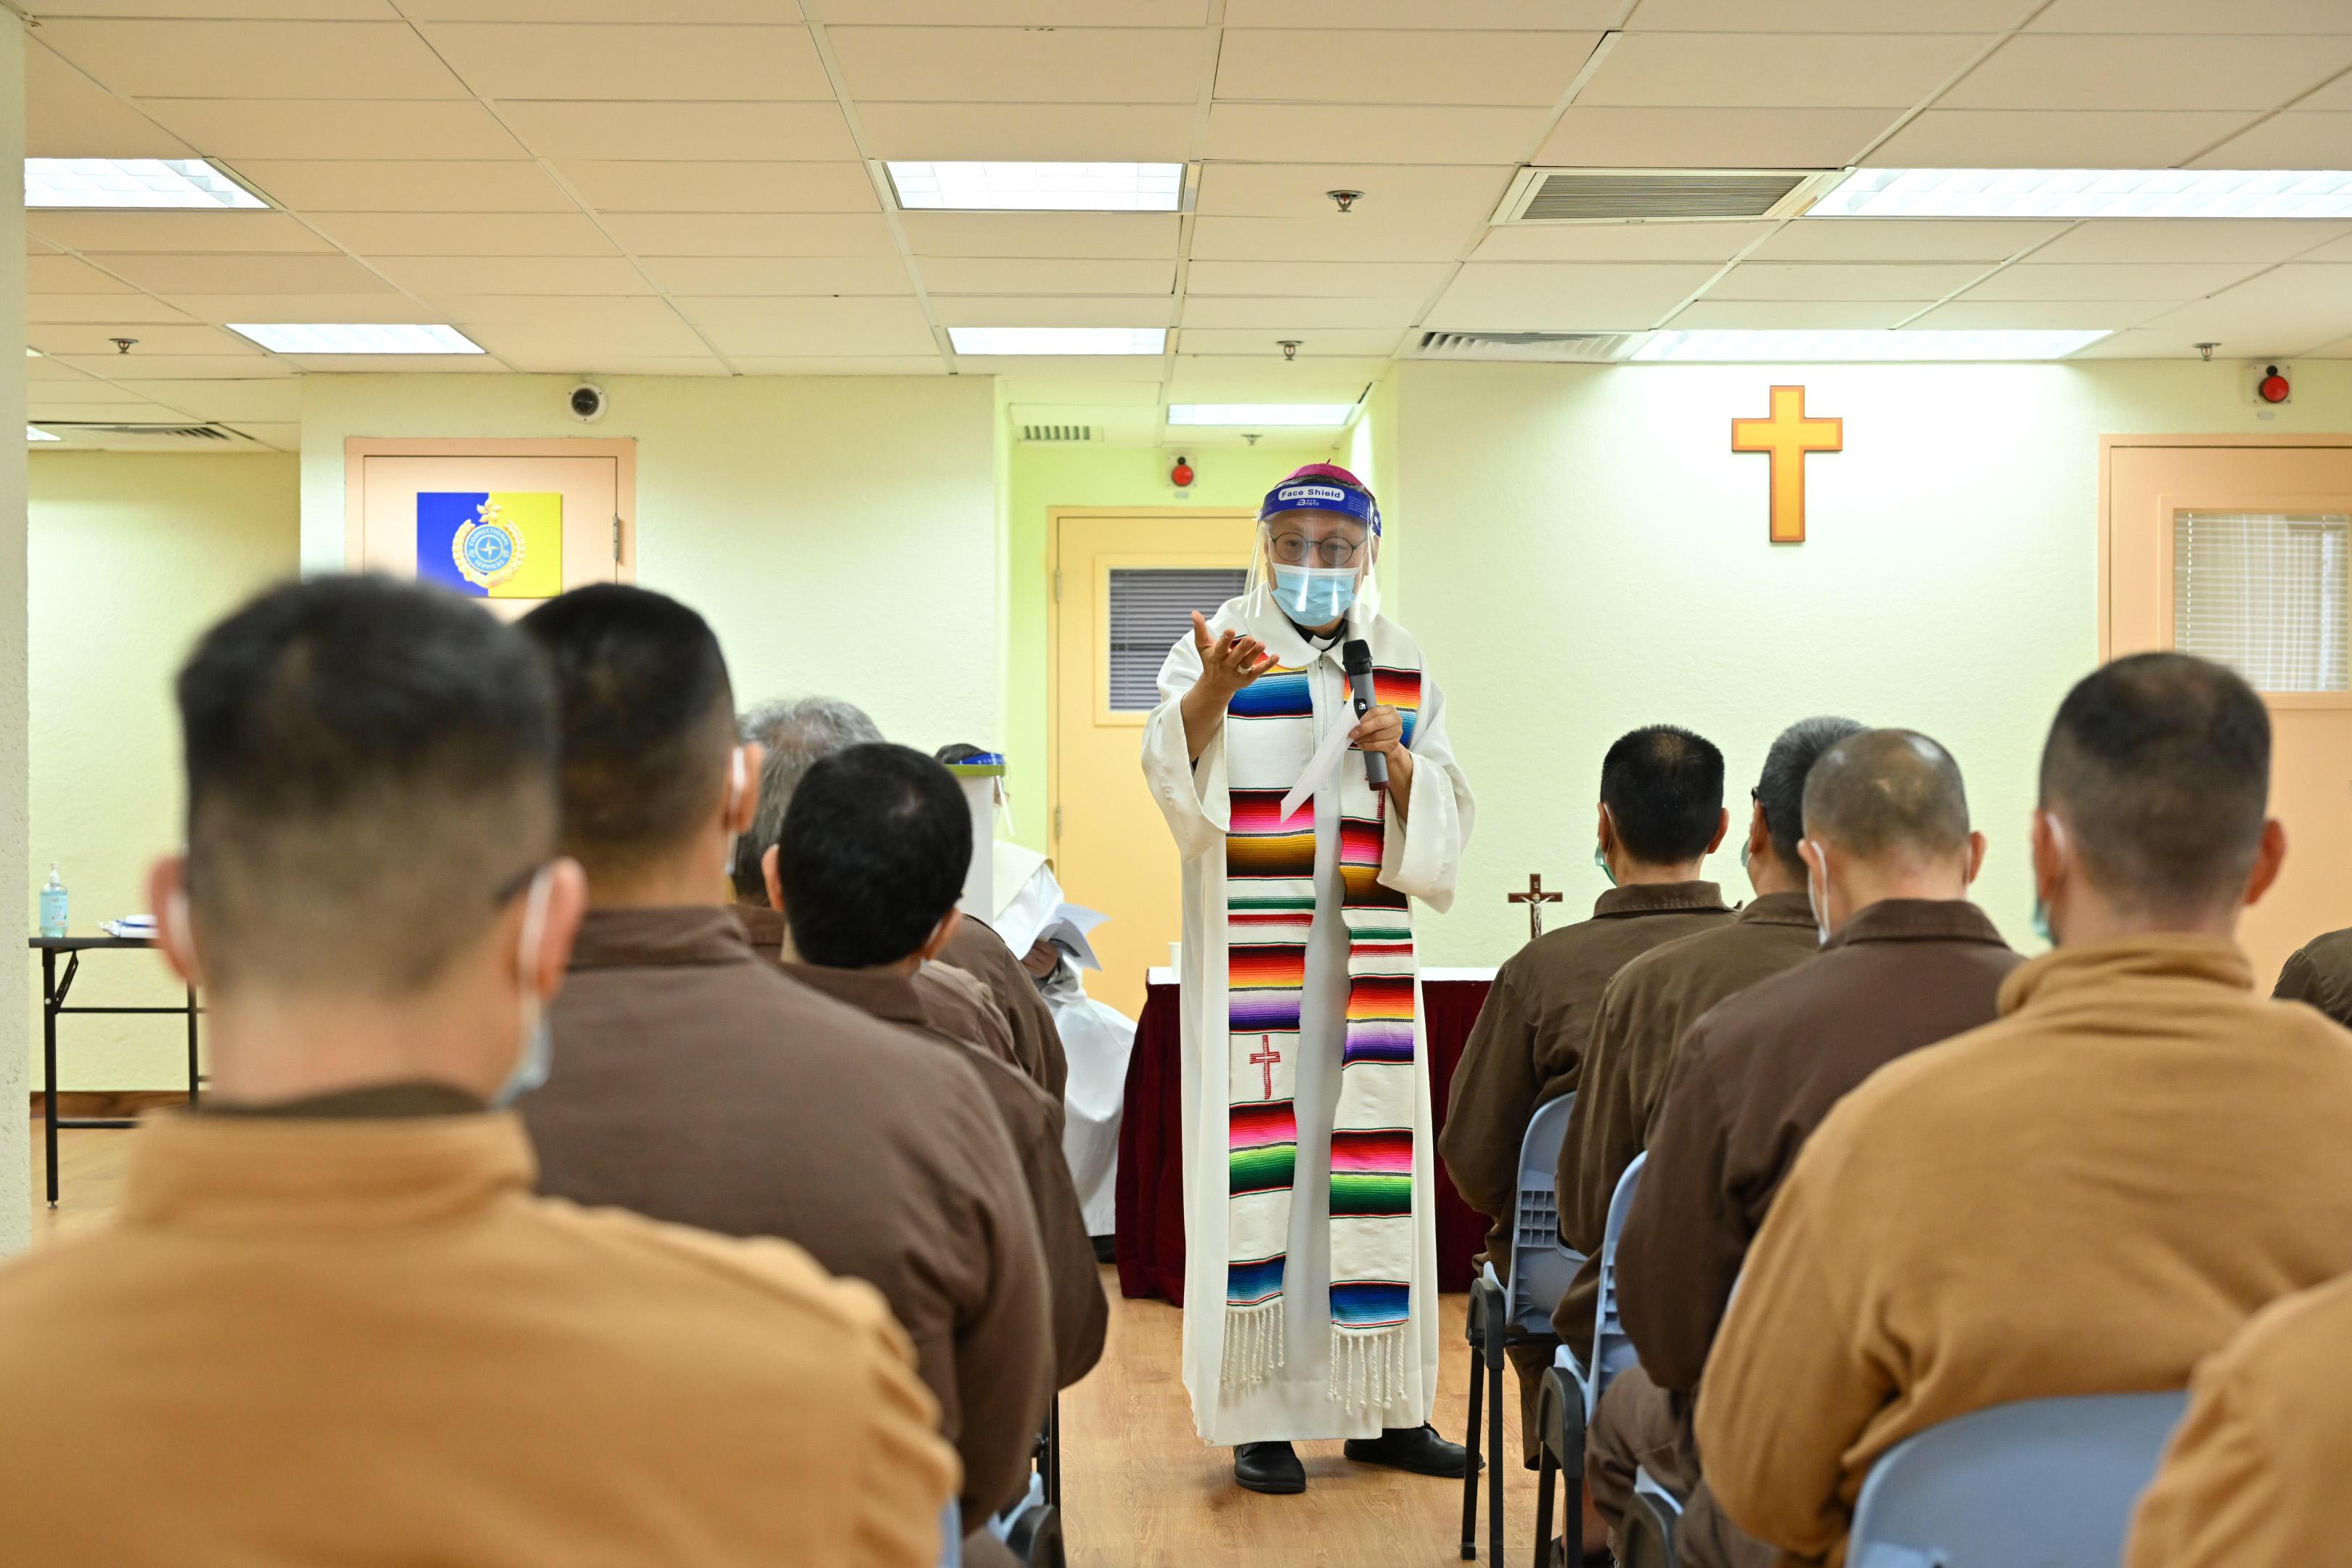 The Correctional Services Department has arranged for persons in custody to attend activities during the Christmas festive period. The Catholic Bishop of Hong Kong, the Most Reverend Stephen Chow, visited Stanley Prison and presided at a Christmas Mass today (December 25).